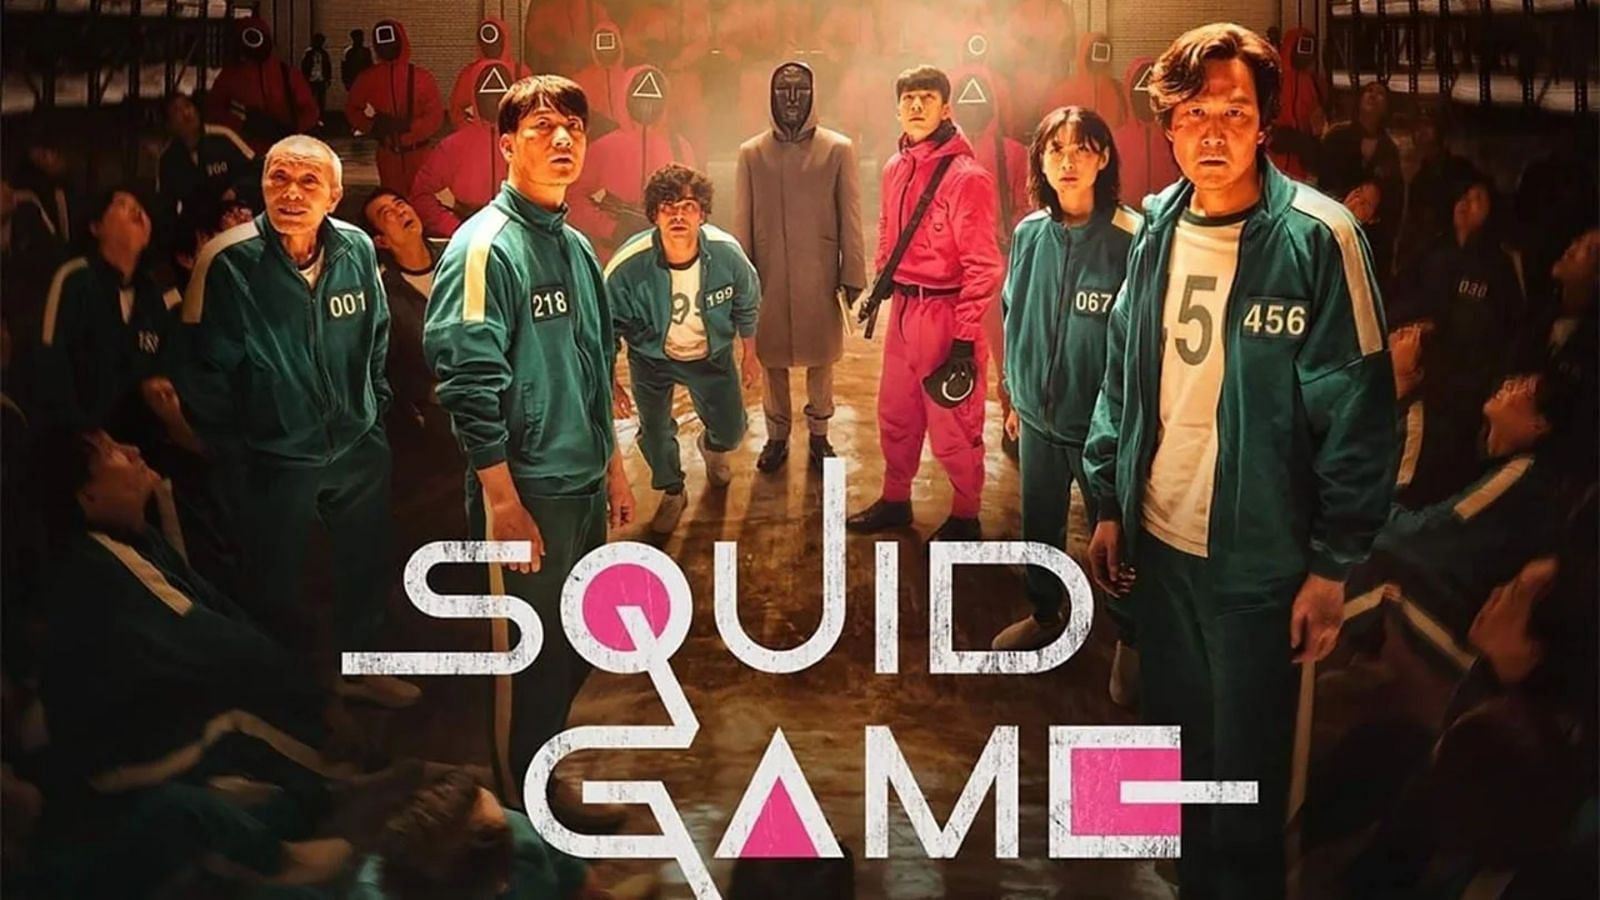 Season 2 of Squid Game is apparently in production (Image via Wallpaperaccess.com)